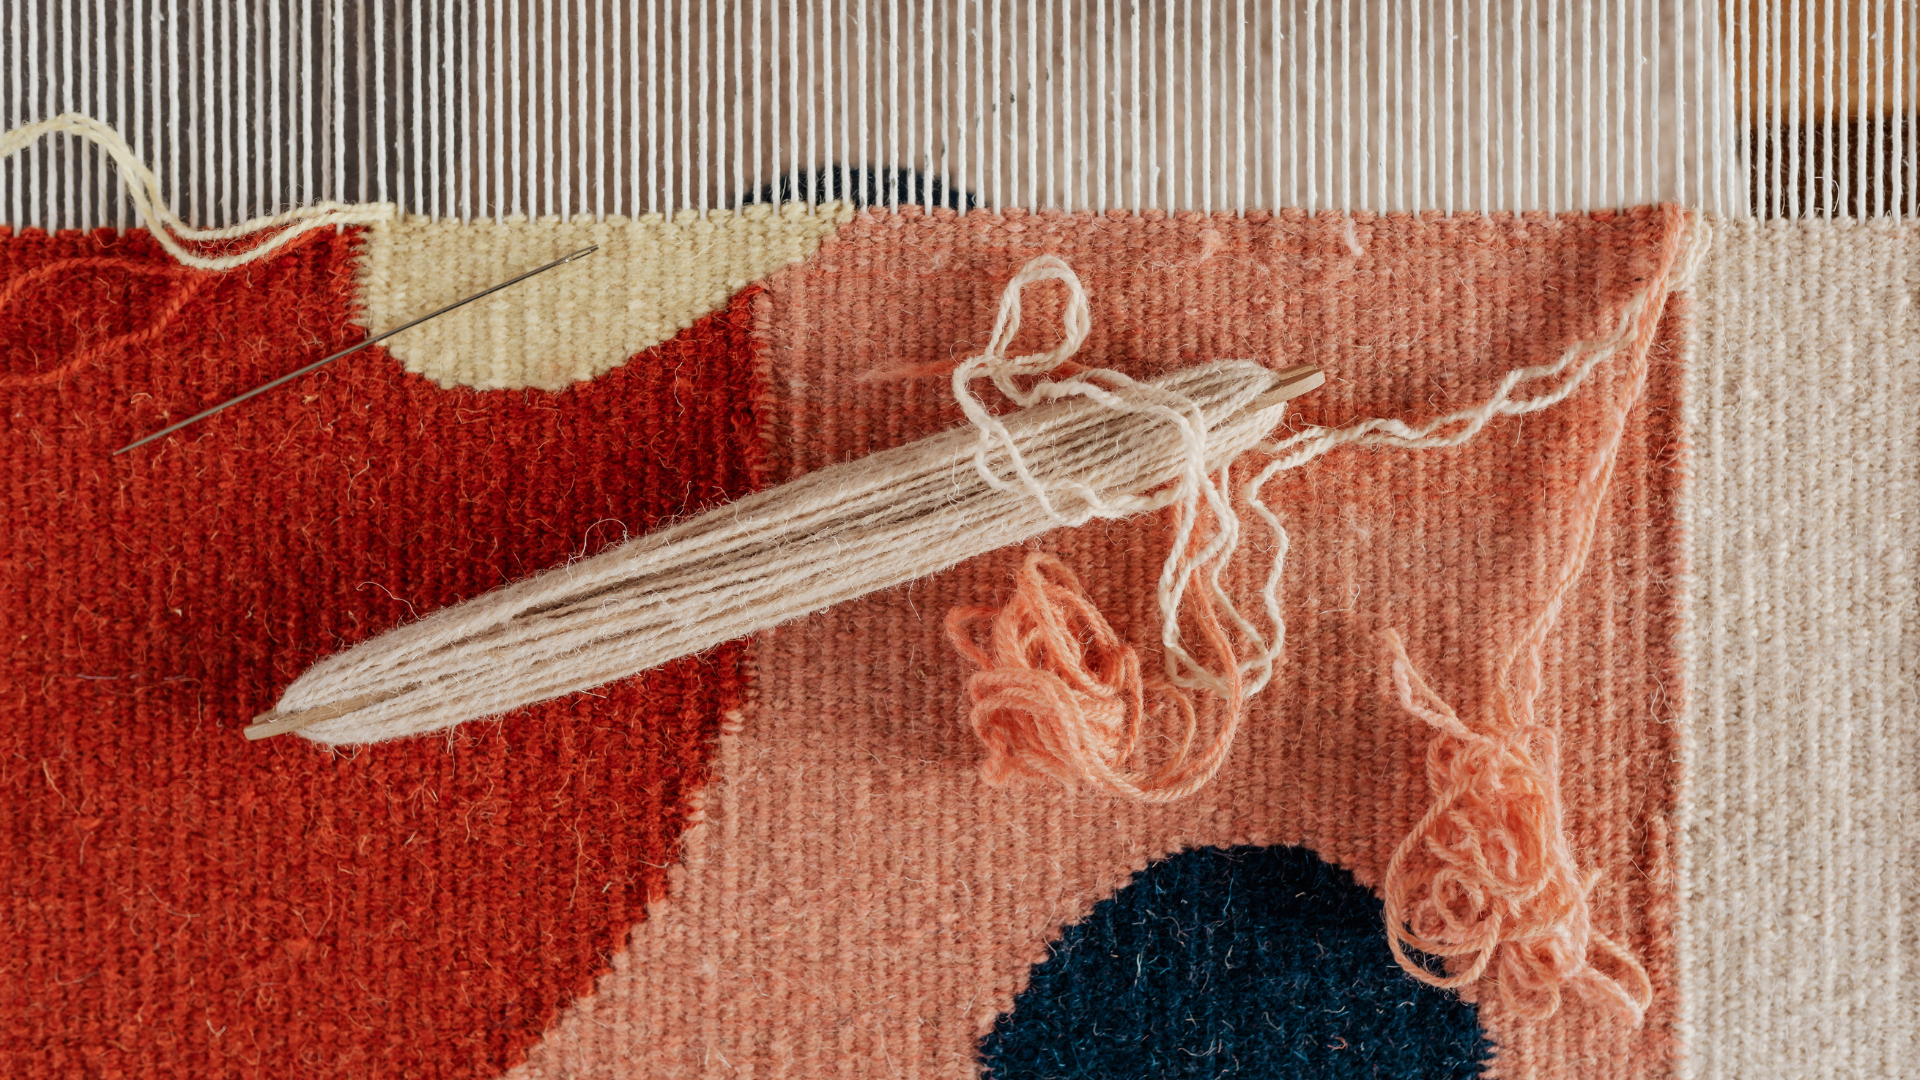 A close-up view of a weaver's loom with colorful threads and intricate patterns in progress.